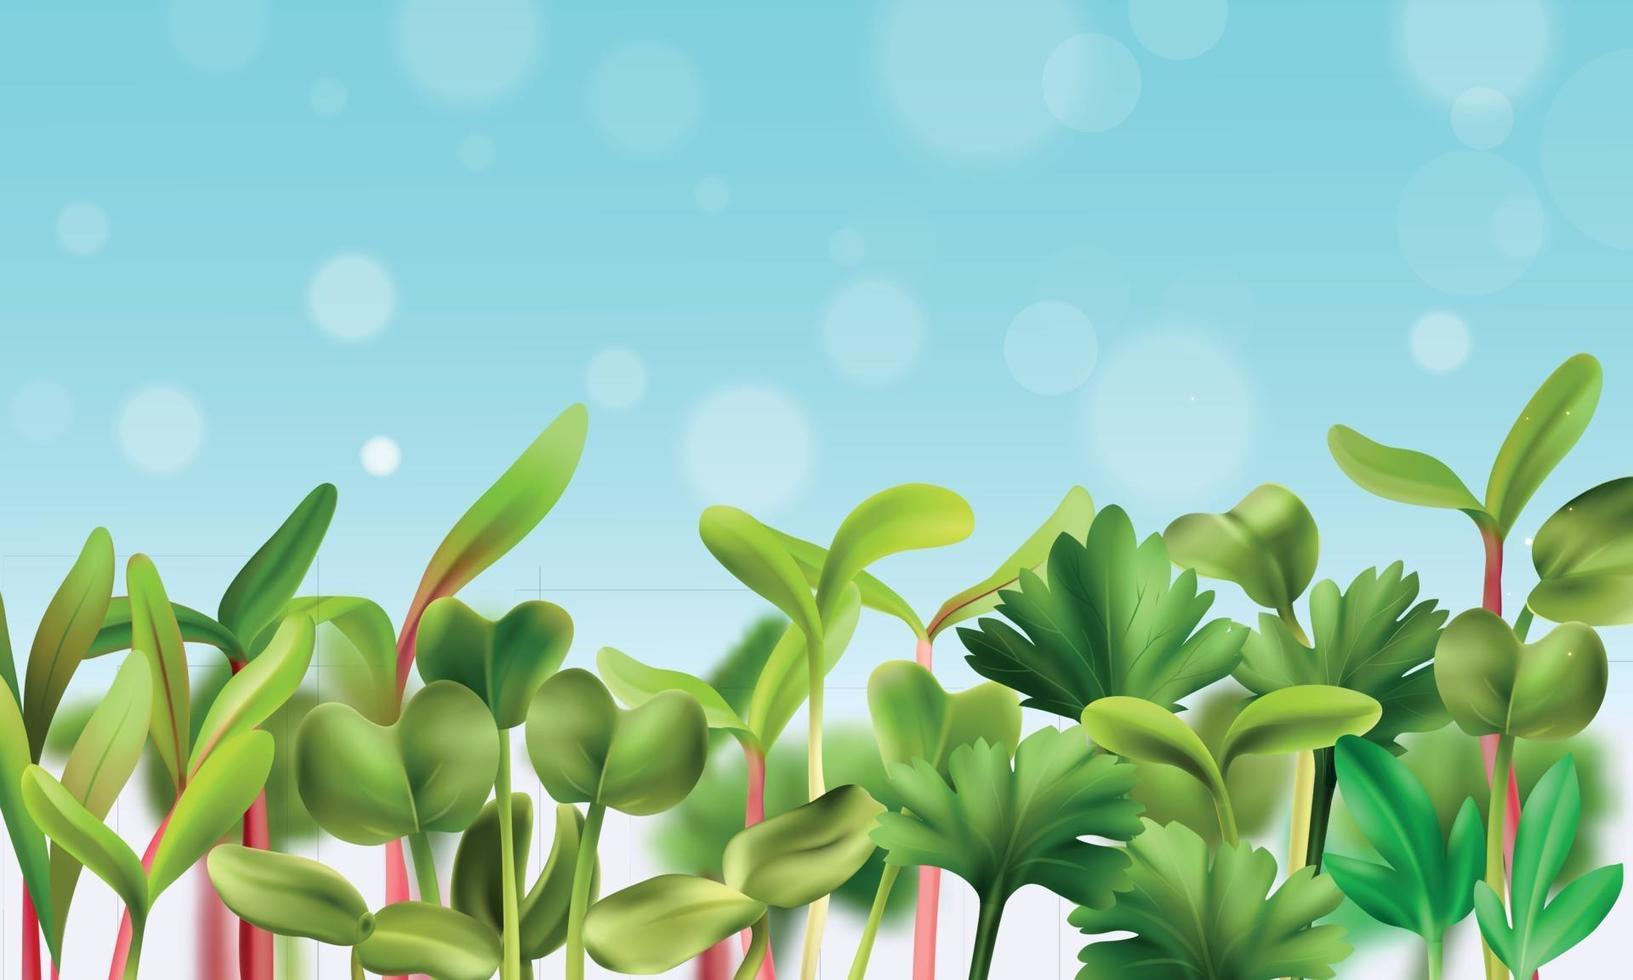 Healthy Nutrition Microgreens Background vector